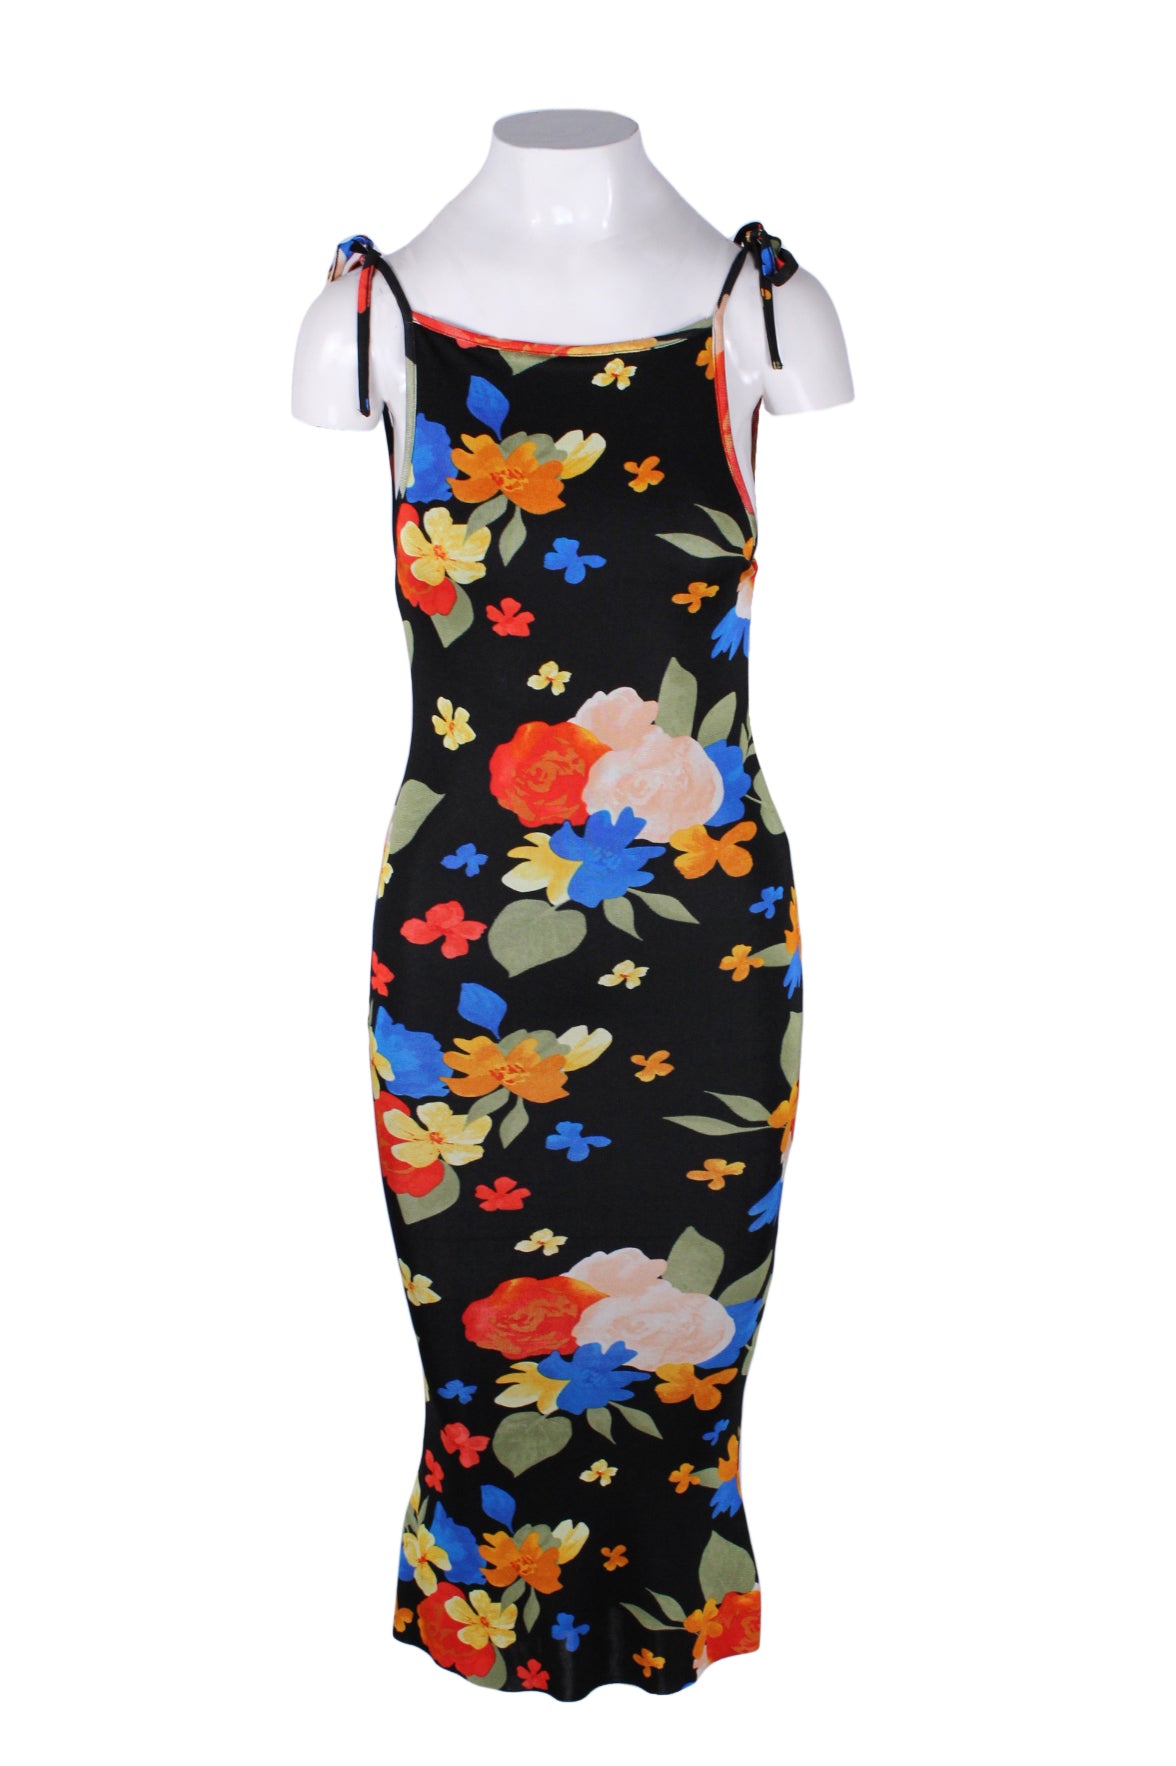 description: danielle bernstein by weworewhat black and multicolor floral print midi dress. features tie closure at shoulders, fitted style, and square neckline. 